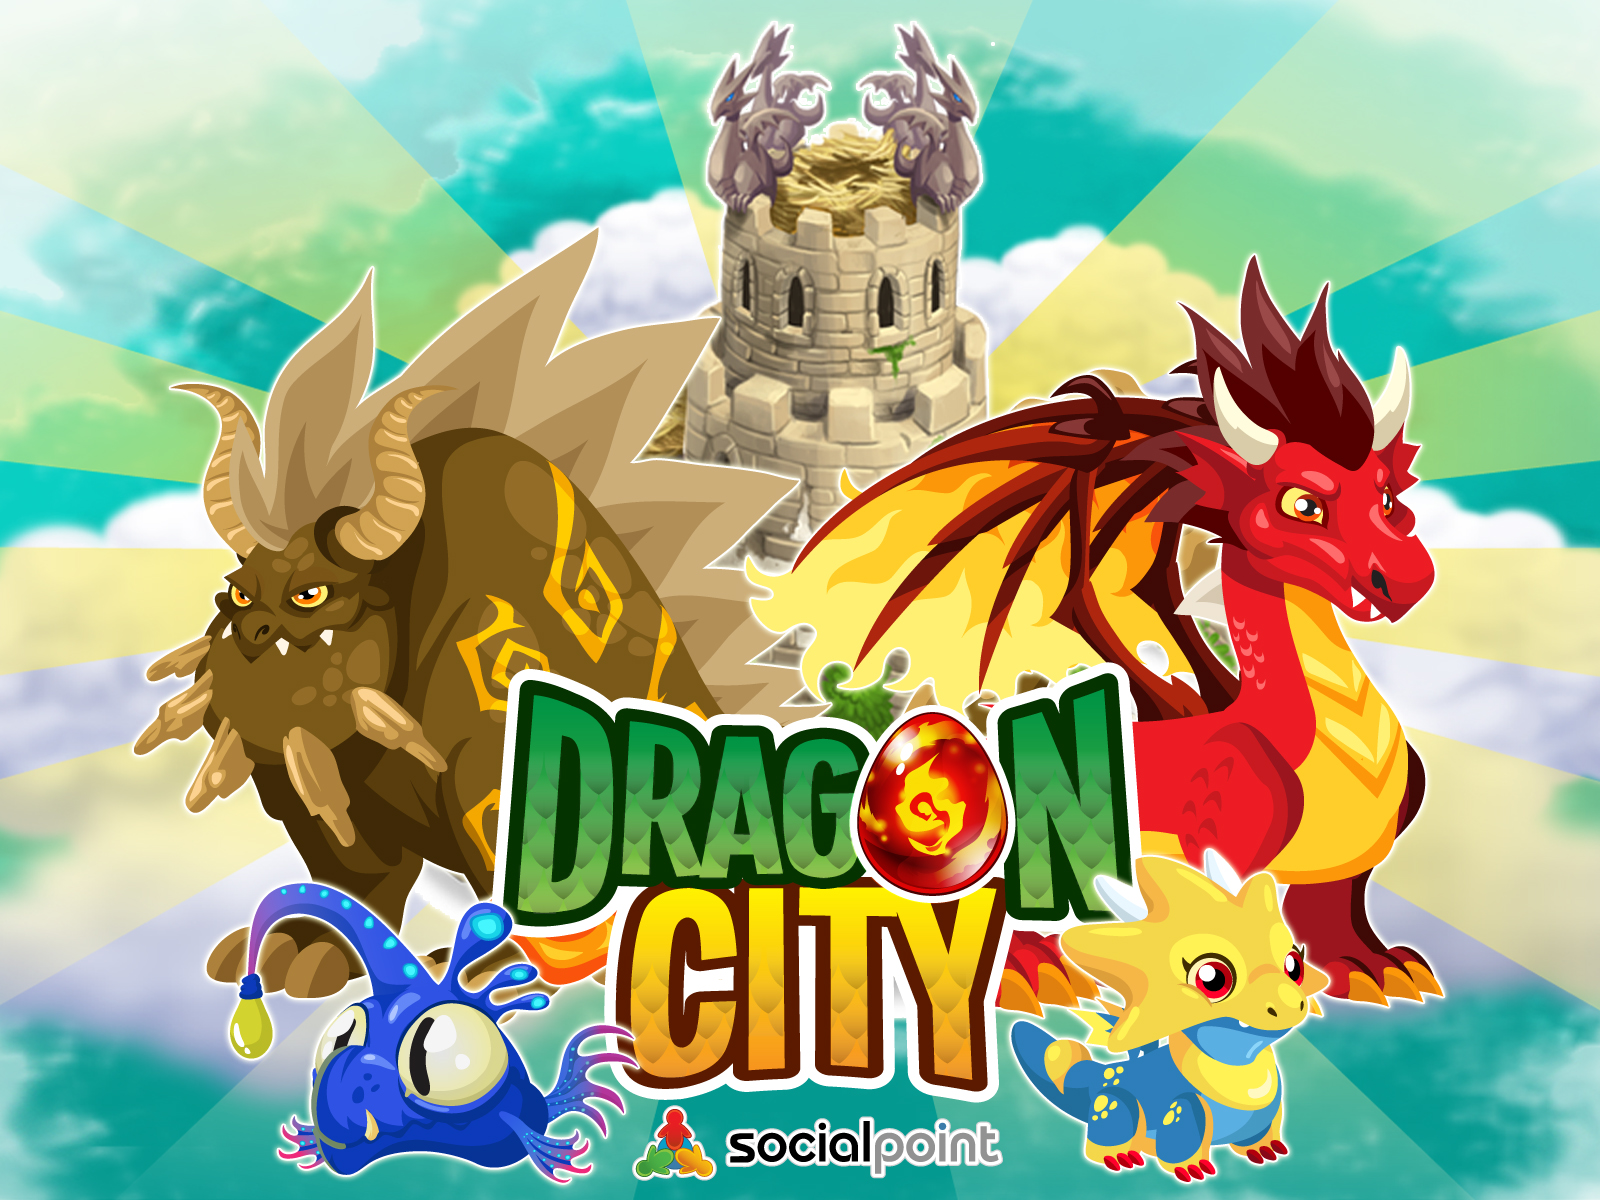 dragon city wallpaper,games,dragon,adventure game,strategy video game,pc game